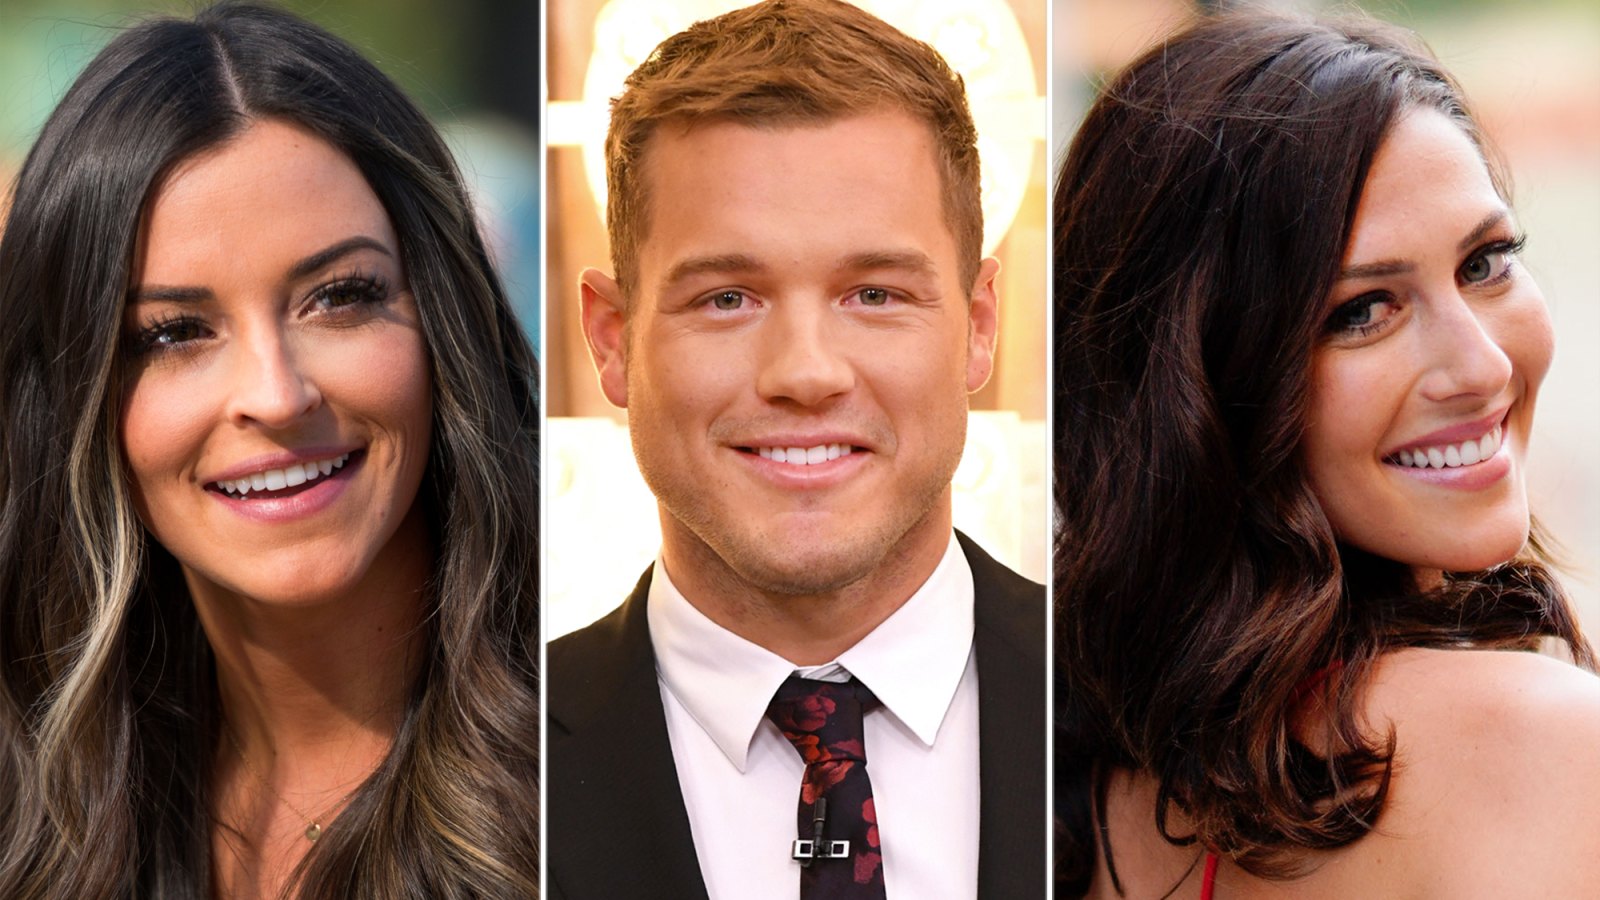 Colton’s Exes Tia and Becca Send Support Ahead of ‘The Bachelor’ Premiere